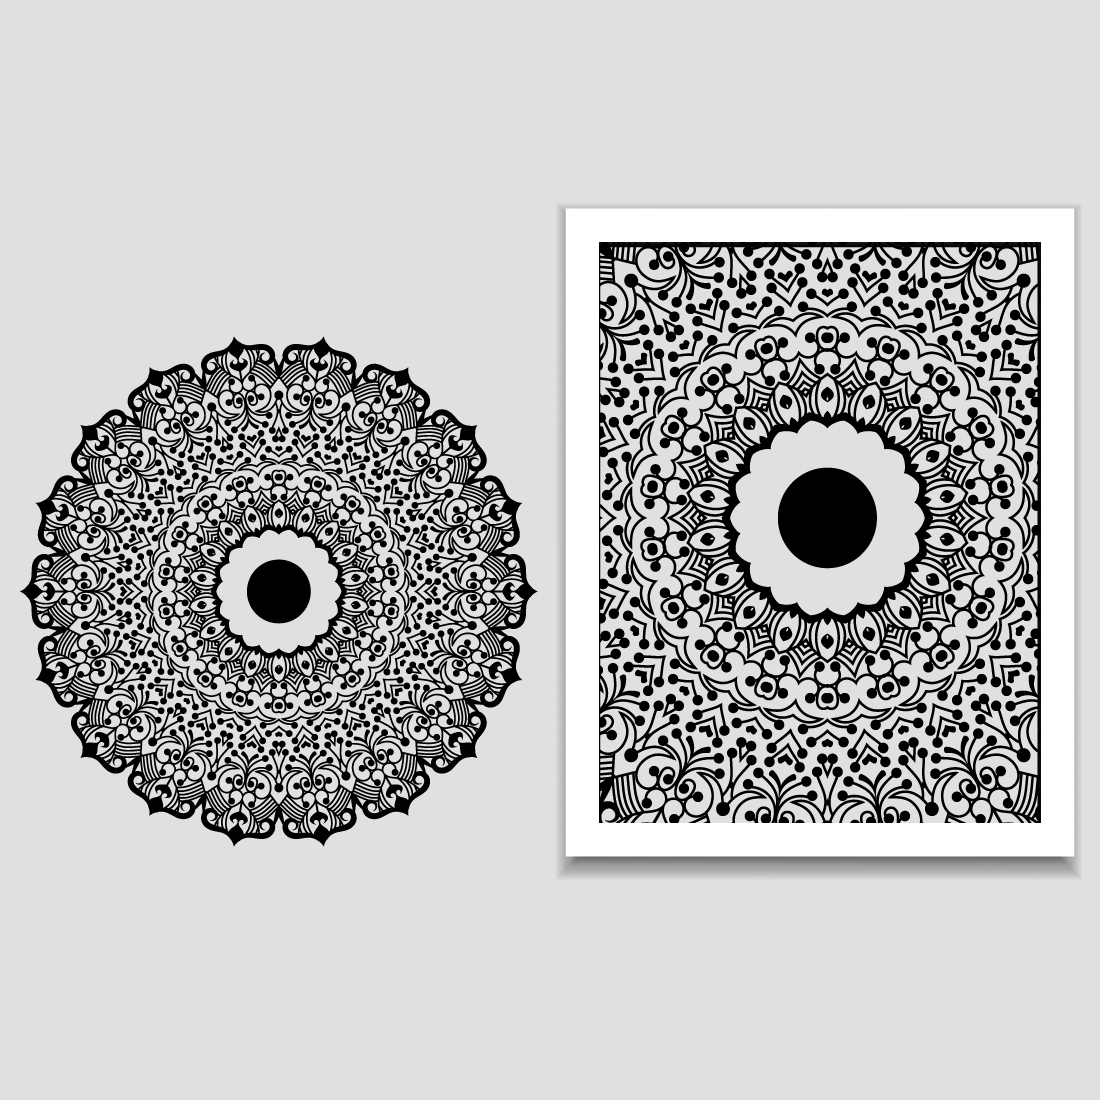 Black and white drawing of a circular object.